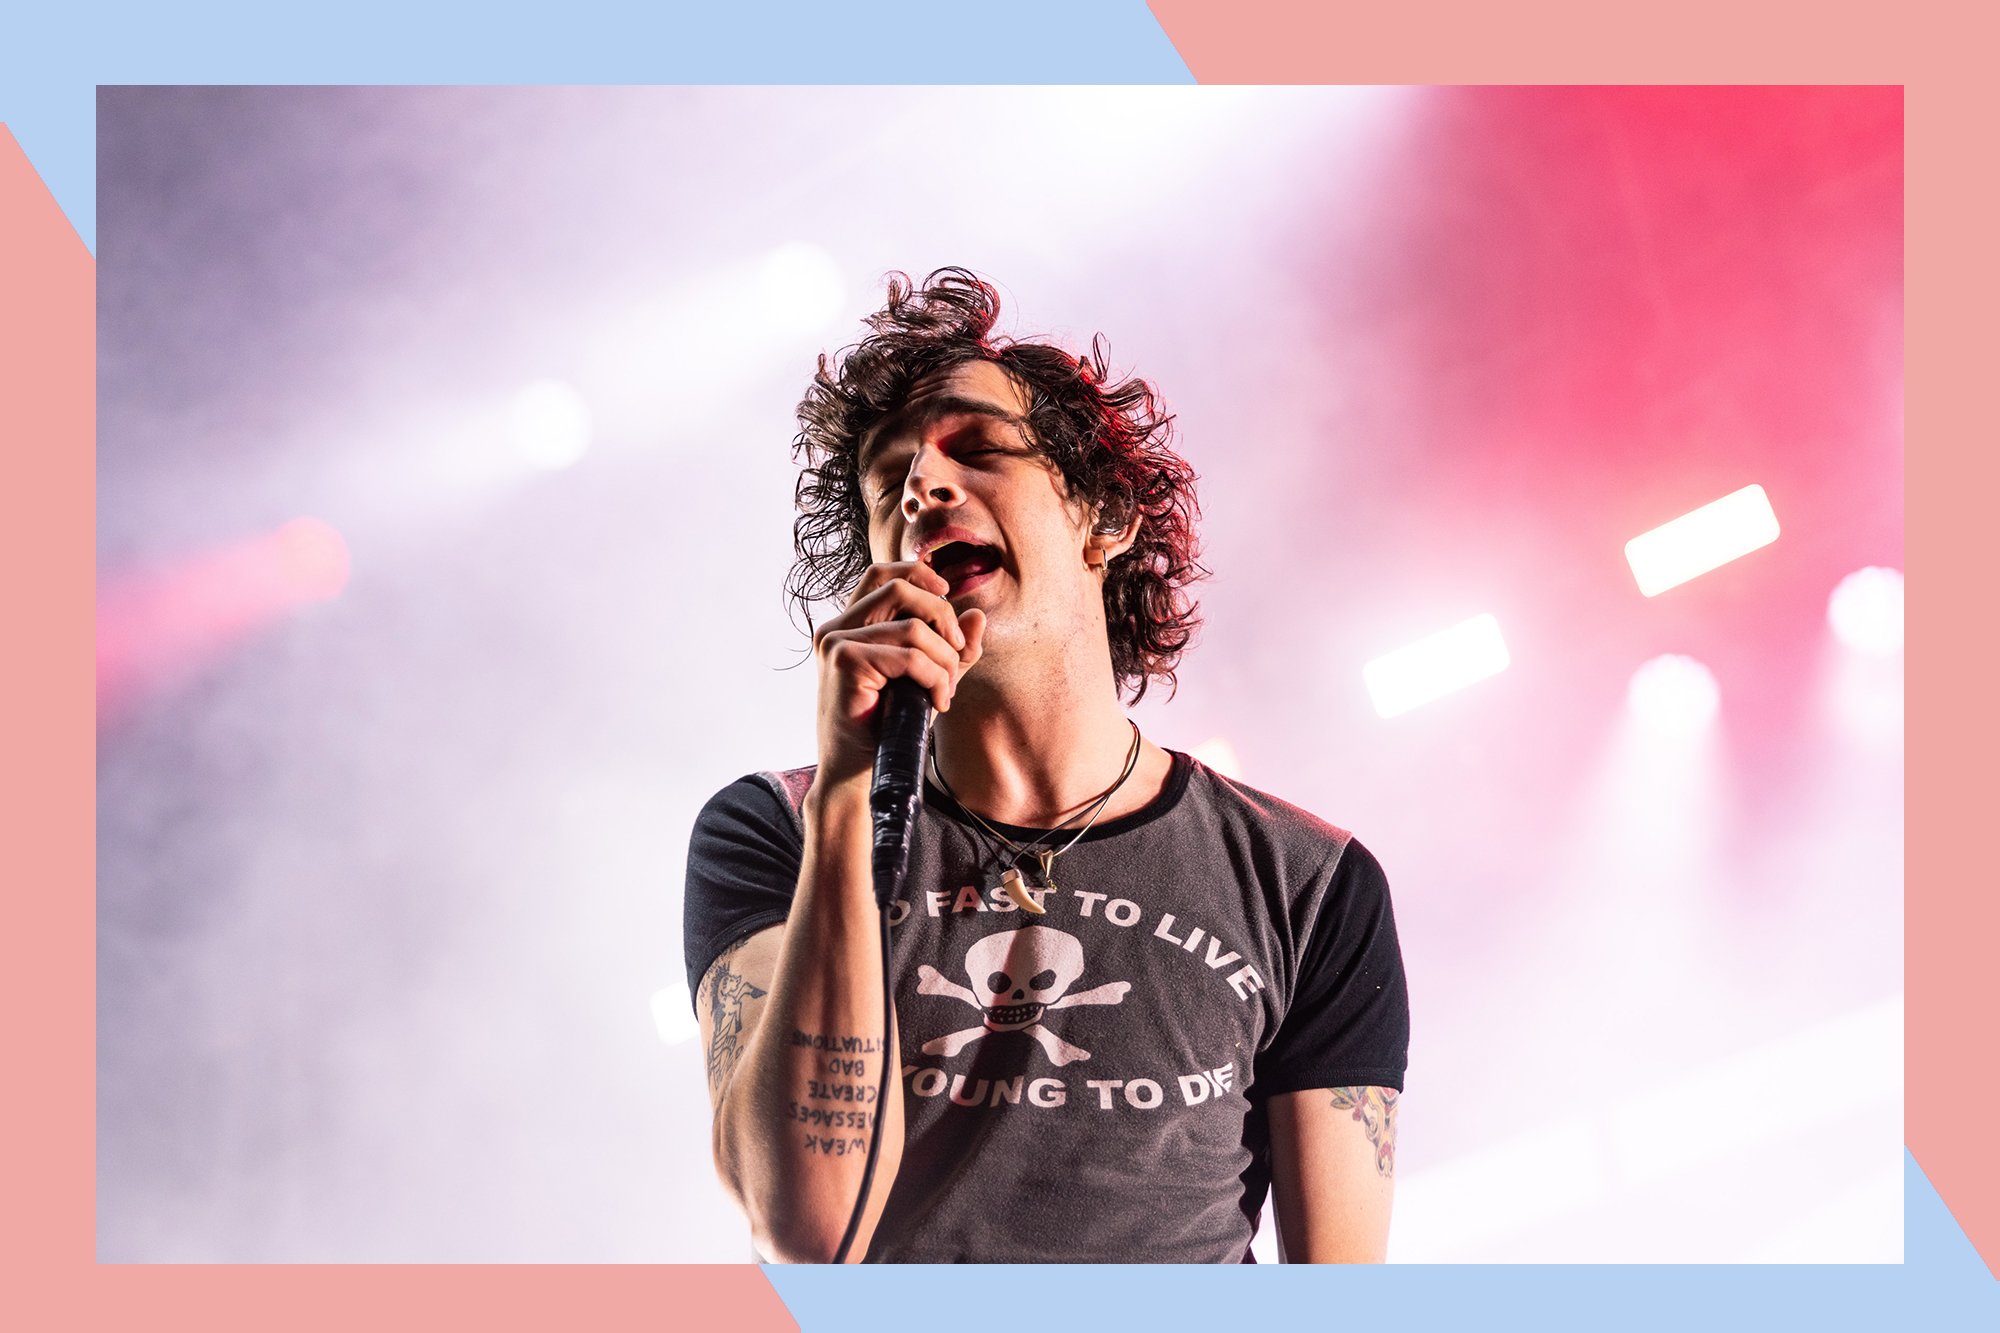 How much do tickets cost to see The 1975 on their tour?